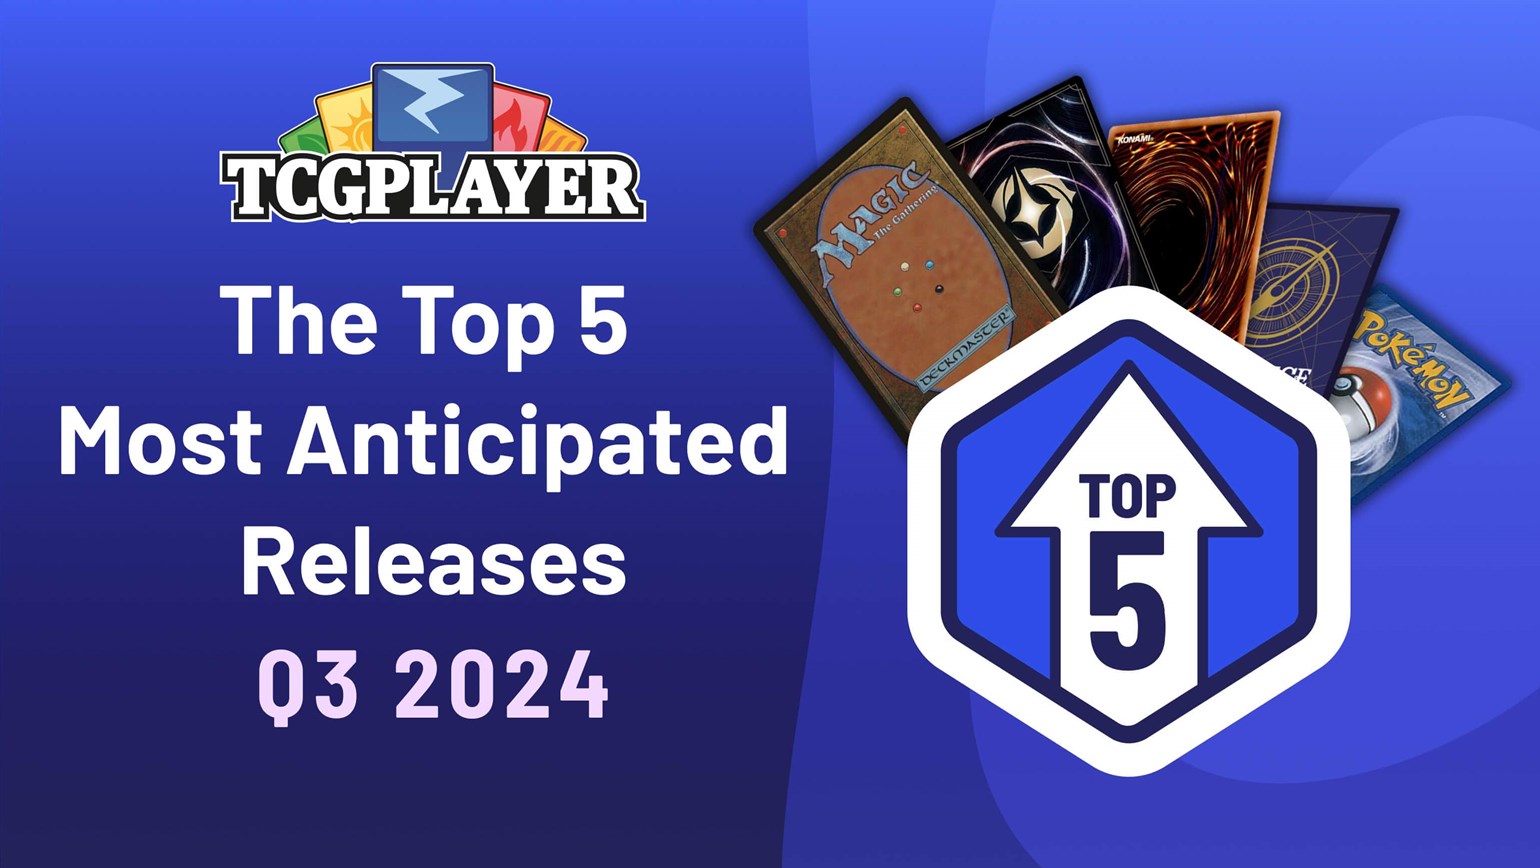 The Top 5 Most Anticipated Releases of Q3 2024